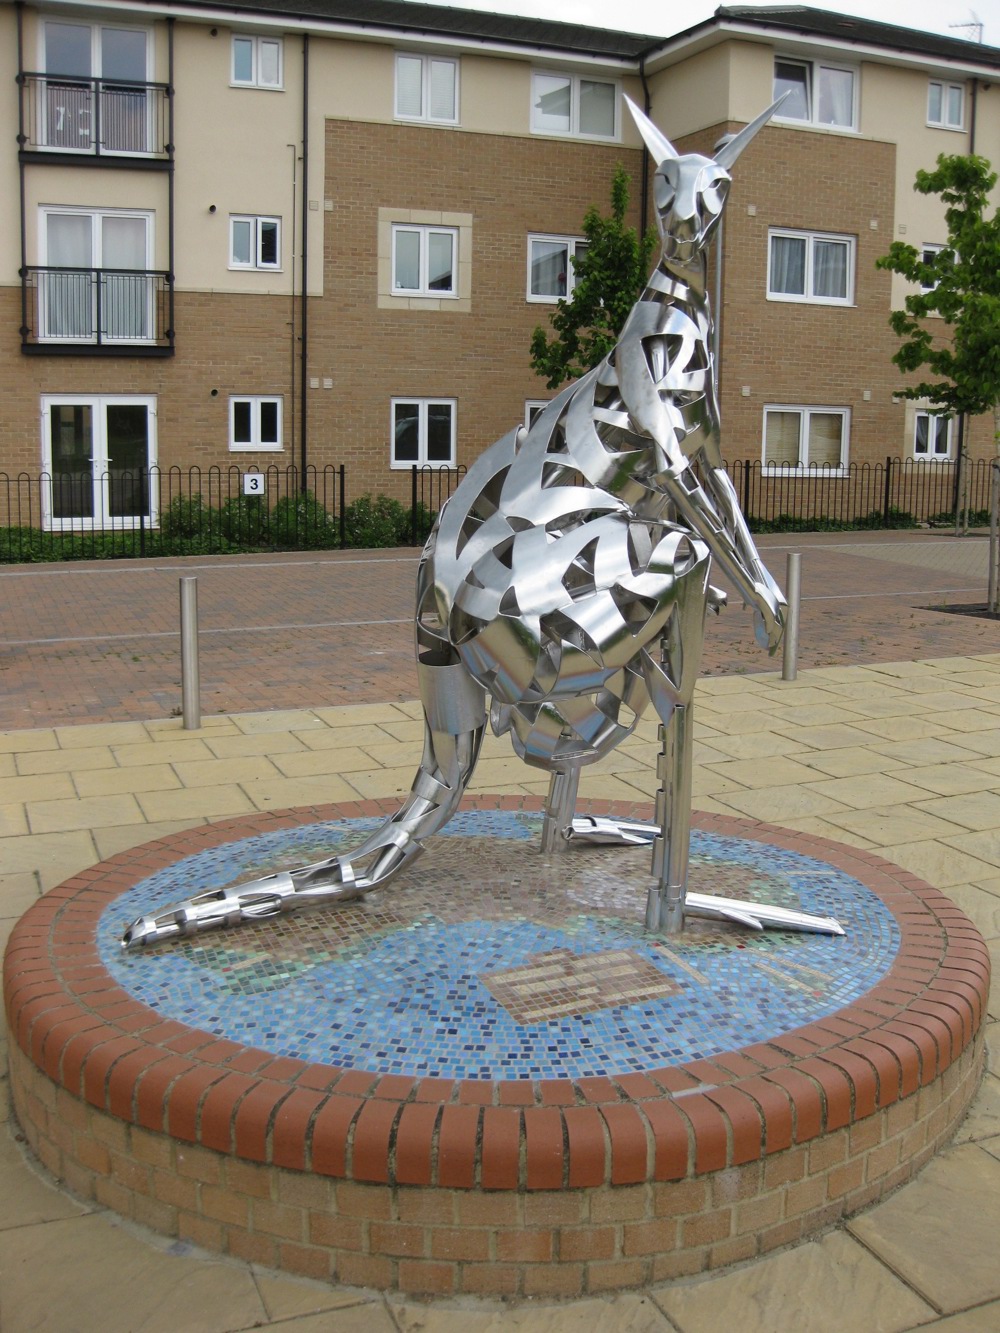 Sculpture of a kangaroo on a plinth opposite some houses